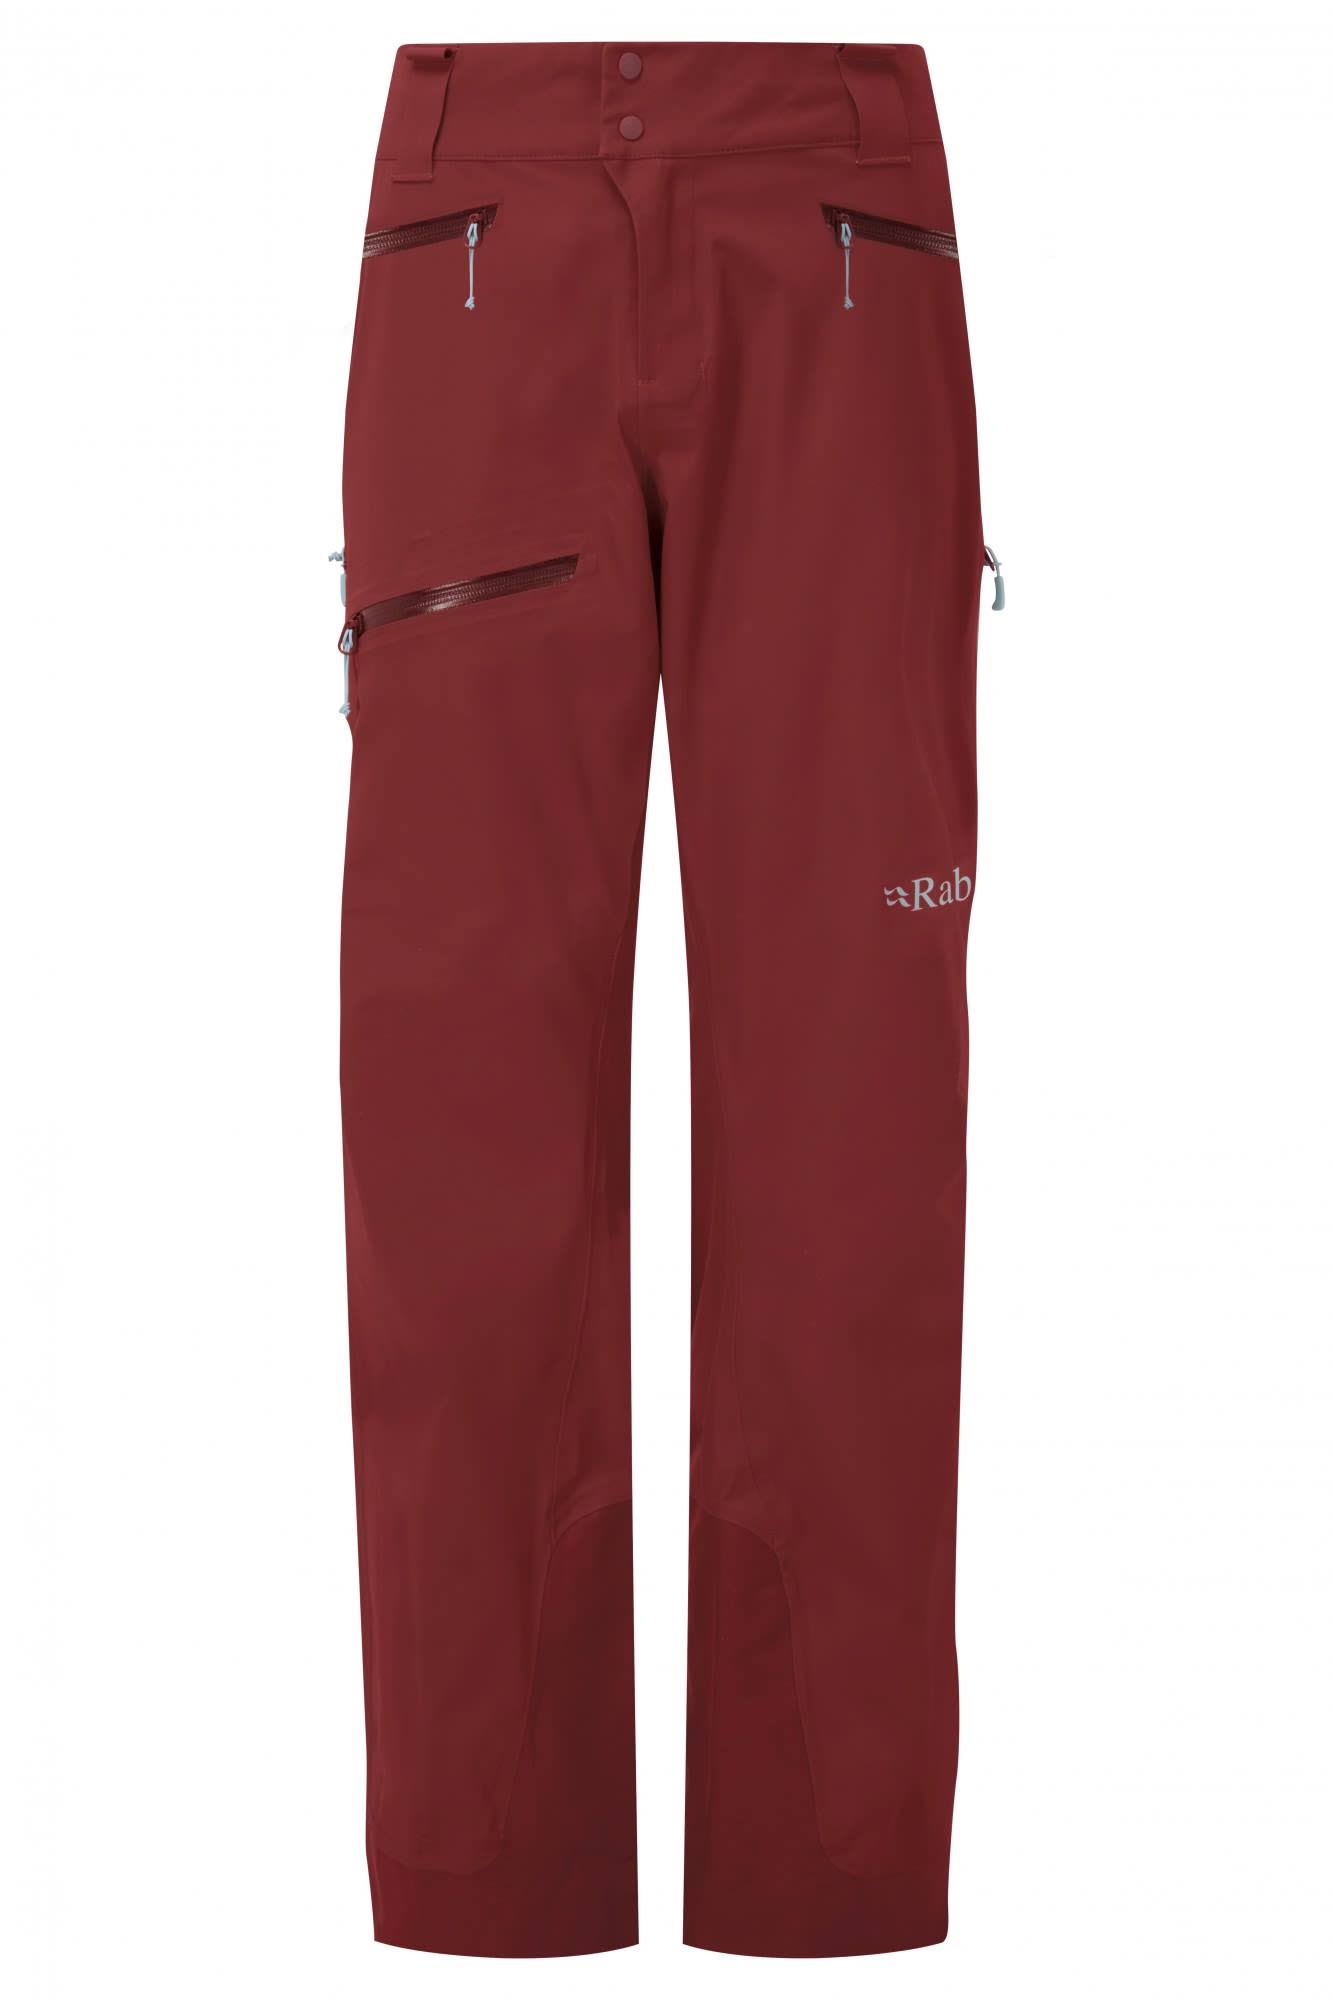 Rab Womens Khroma Kinetic Trousers Oxblood Red -12